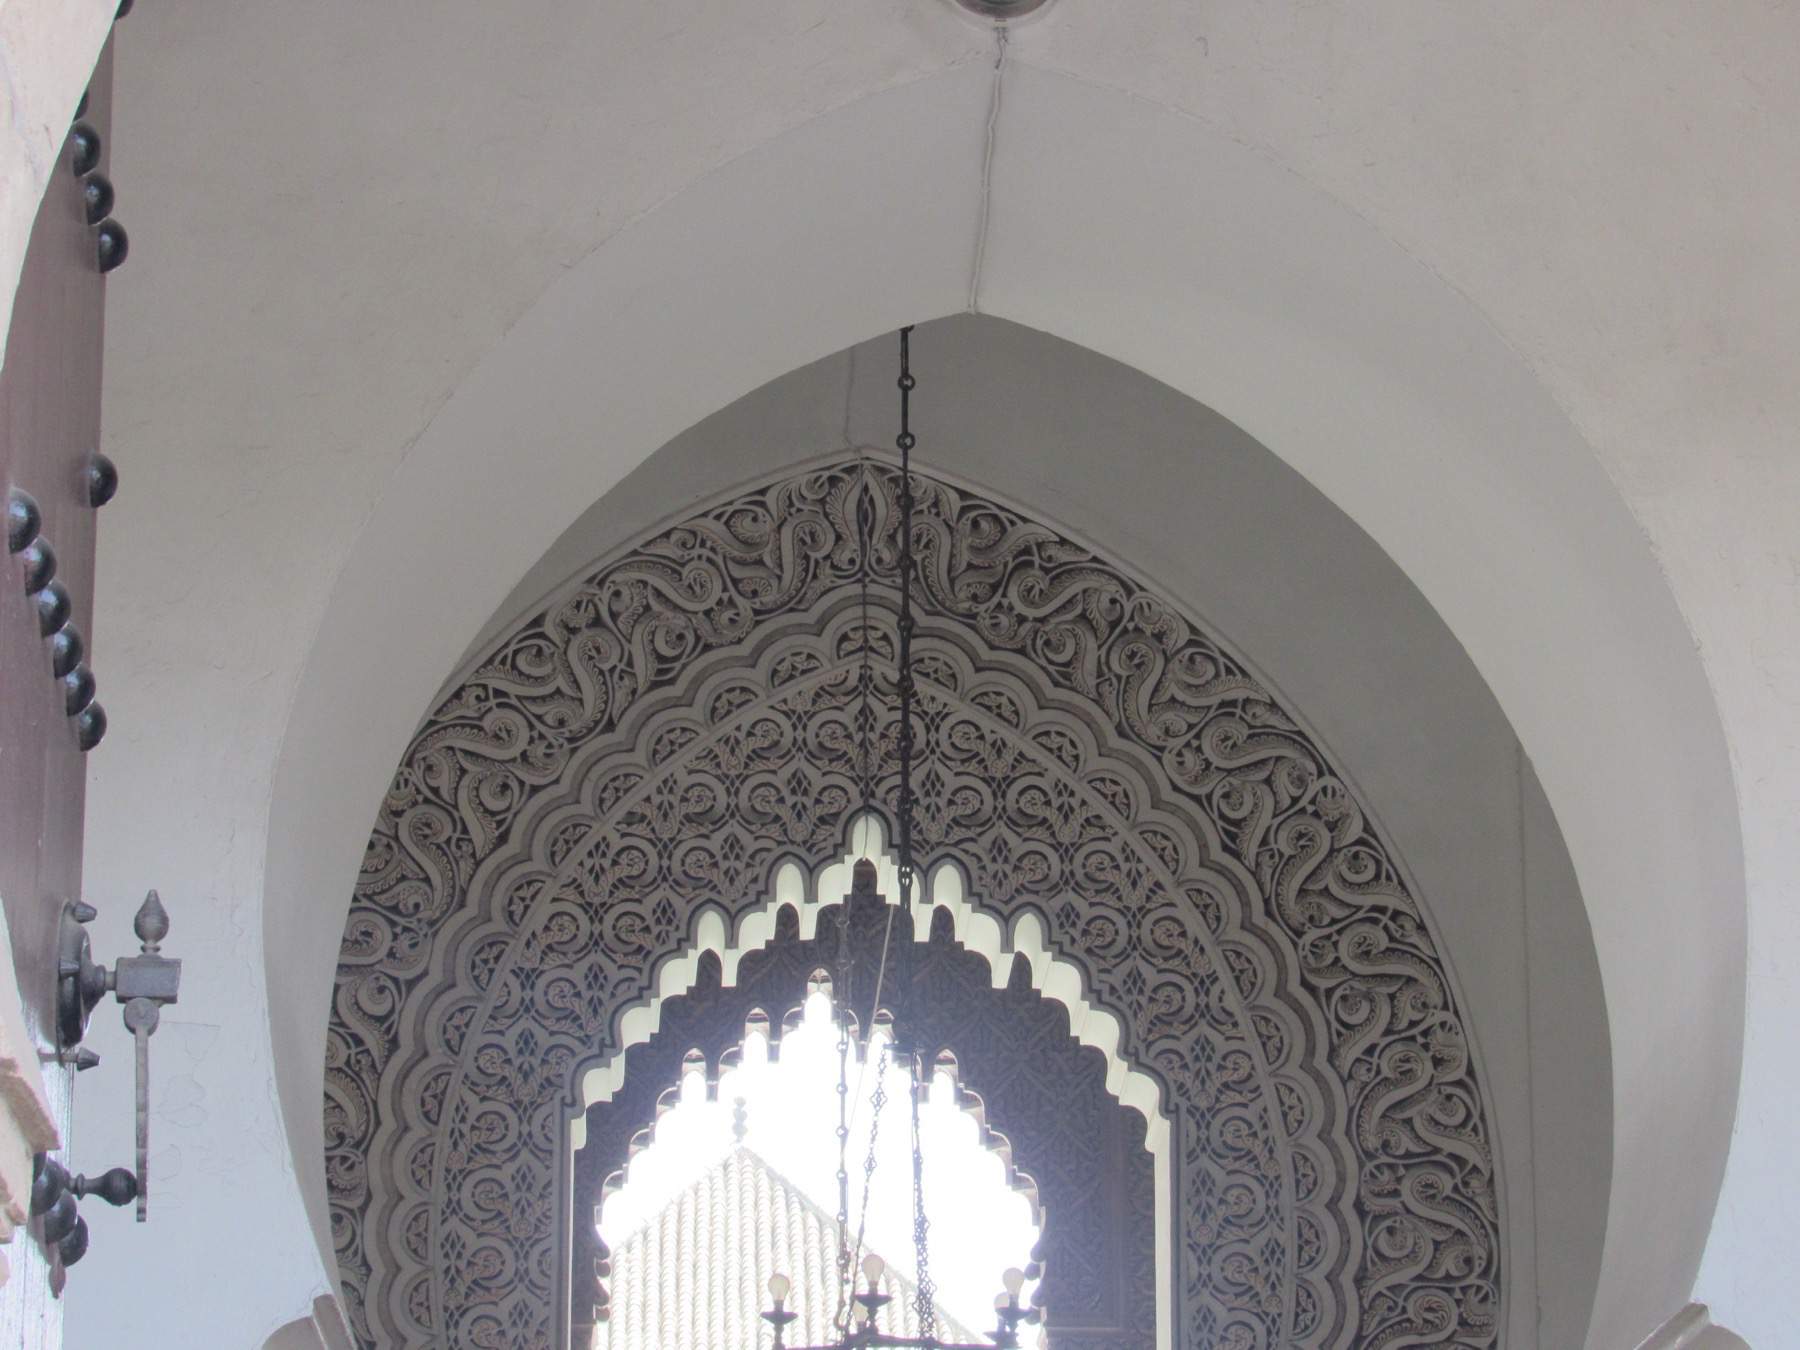 Interior view of Masjid Mohamedi with archway stone carving.